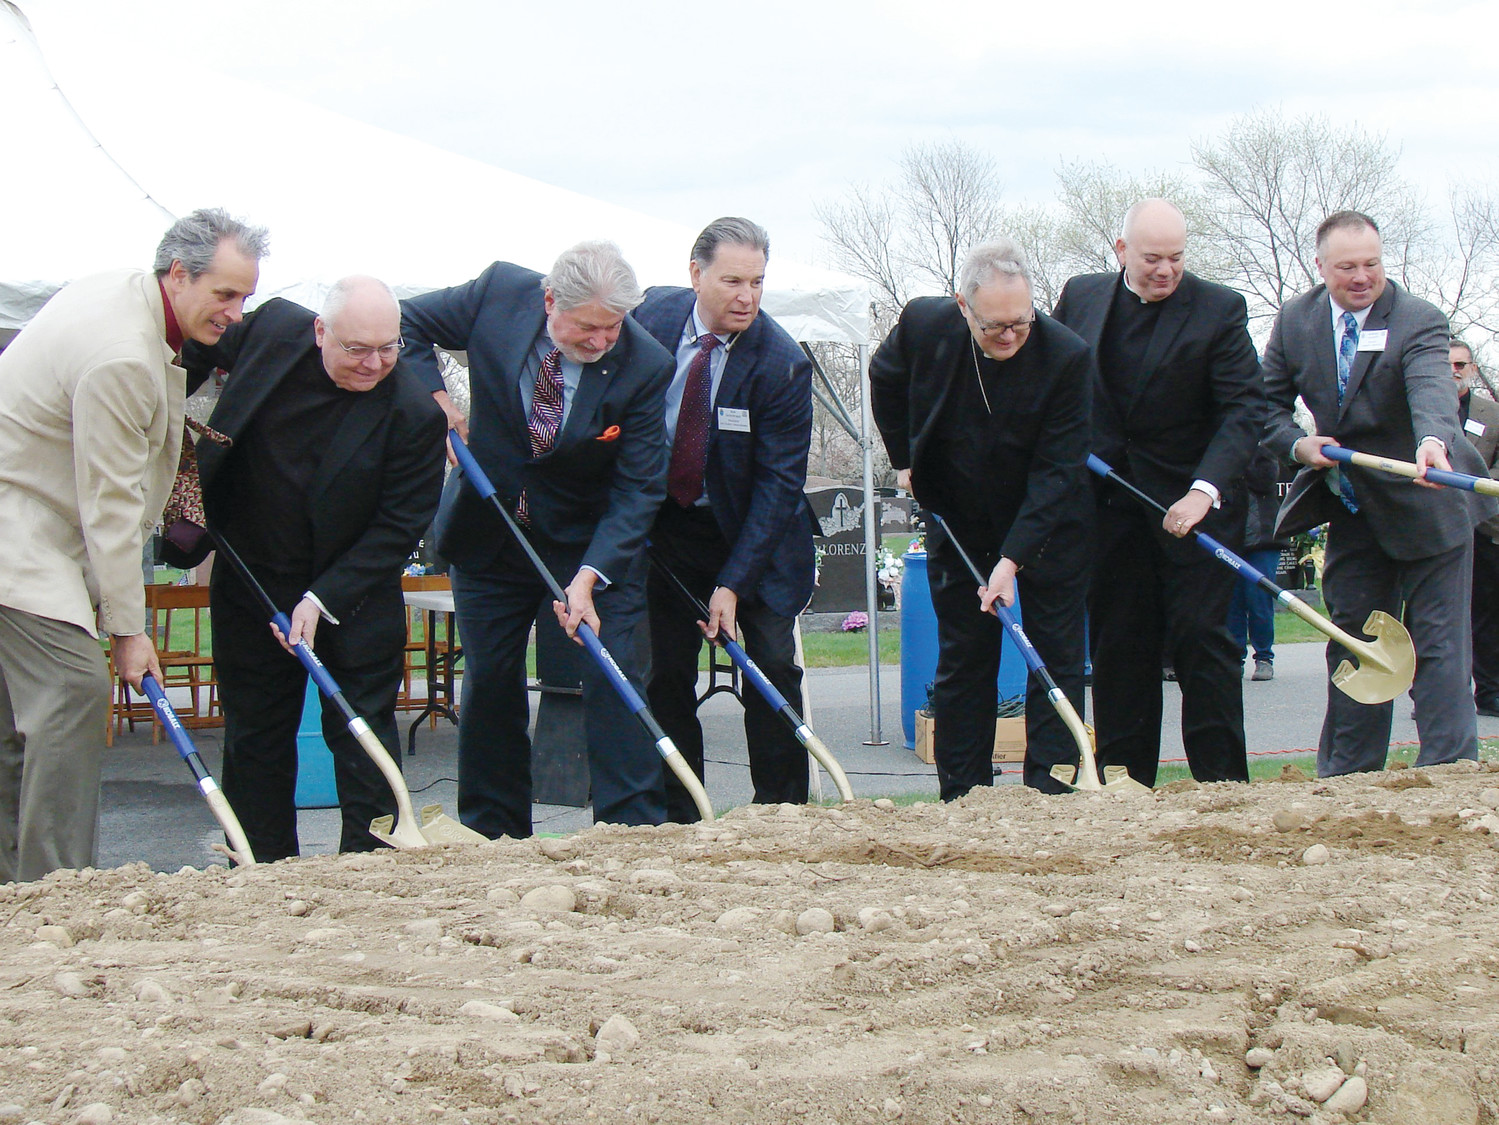 Dignitaries break ground for the new mausoleum at St. Ann Cemetery, Cranston. From left to right, Michael Sabatino, Msgr. Raymond Bastia, Larry Jones, Bob DeBeltrand, Bishop Thomas J. Tobin, Father William Ledoux and Anthony Carpinello.